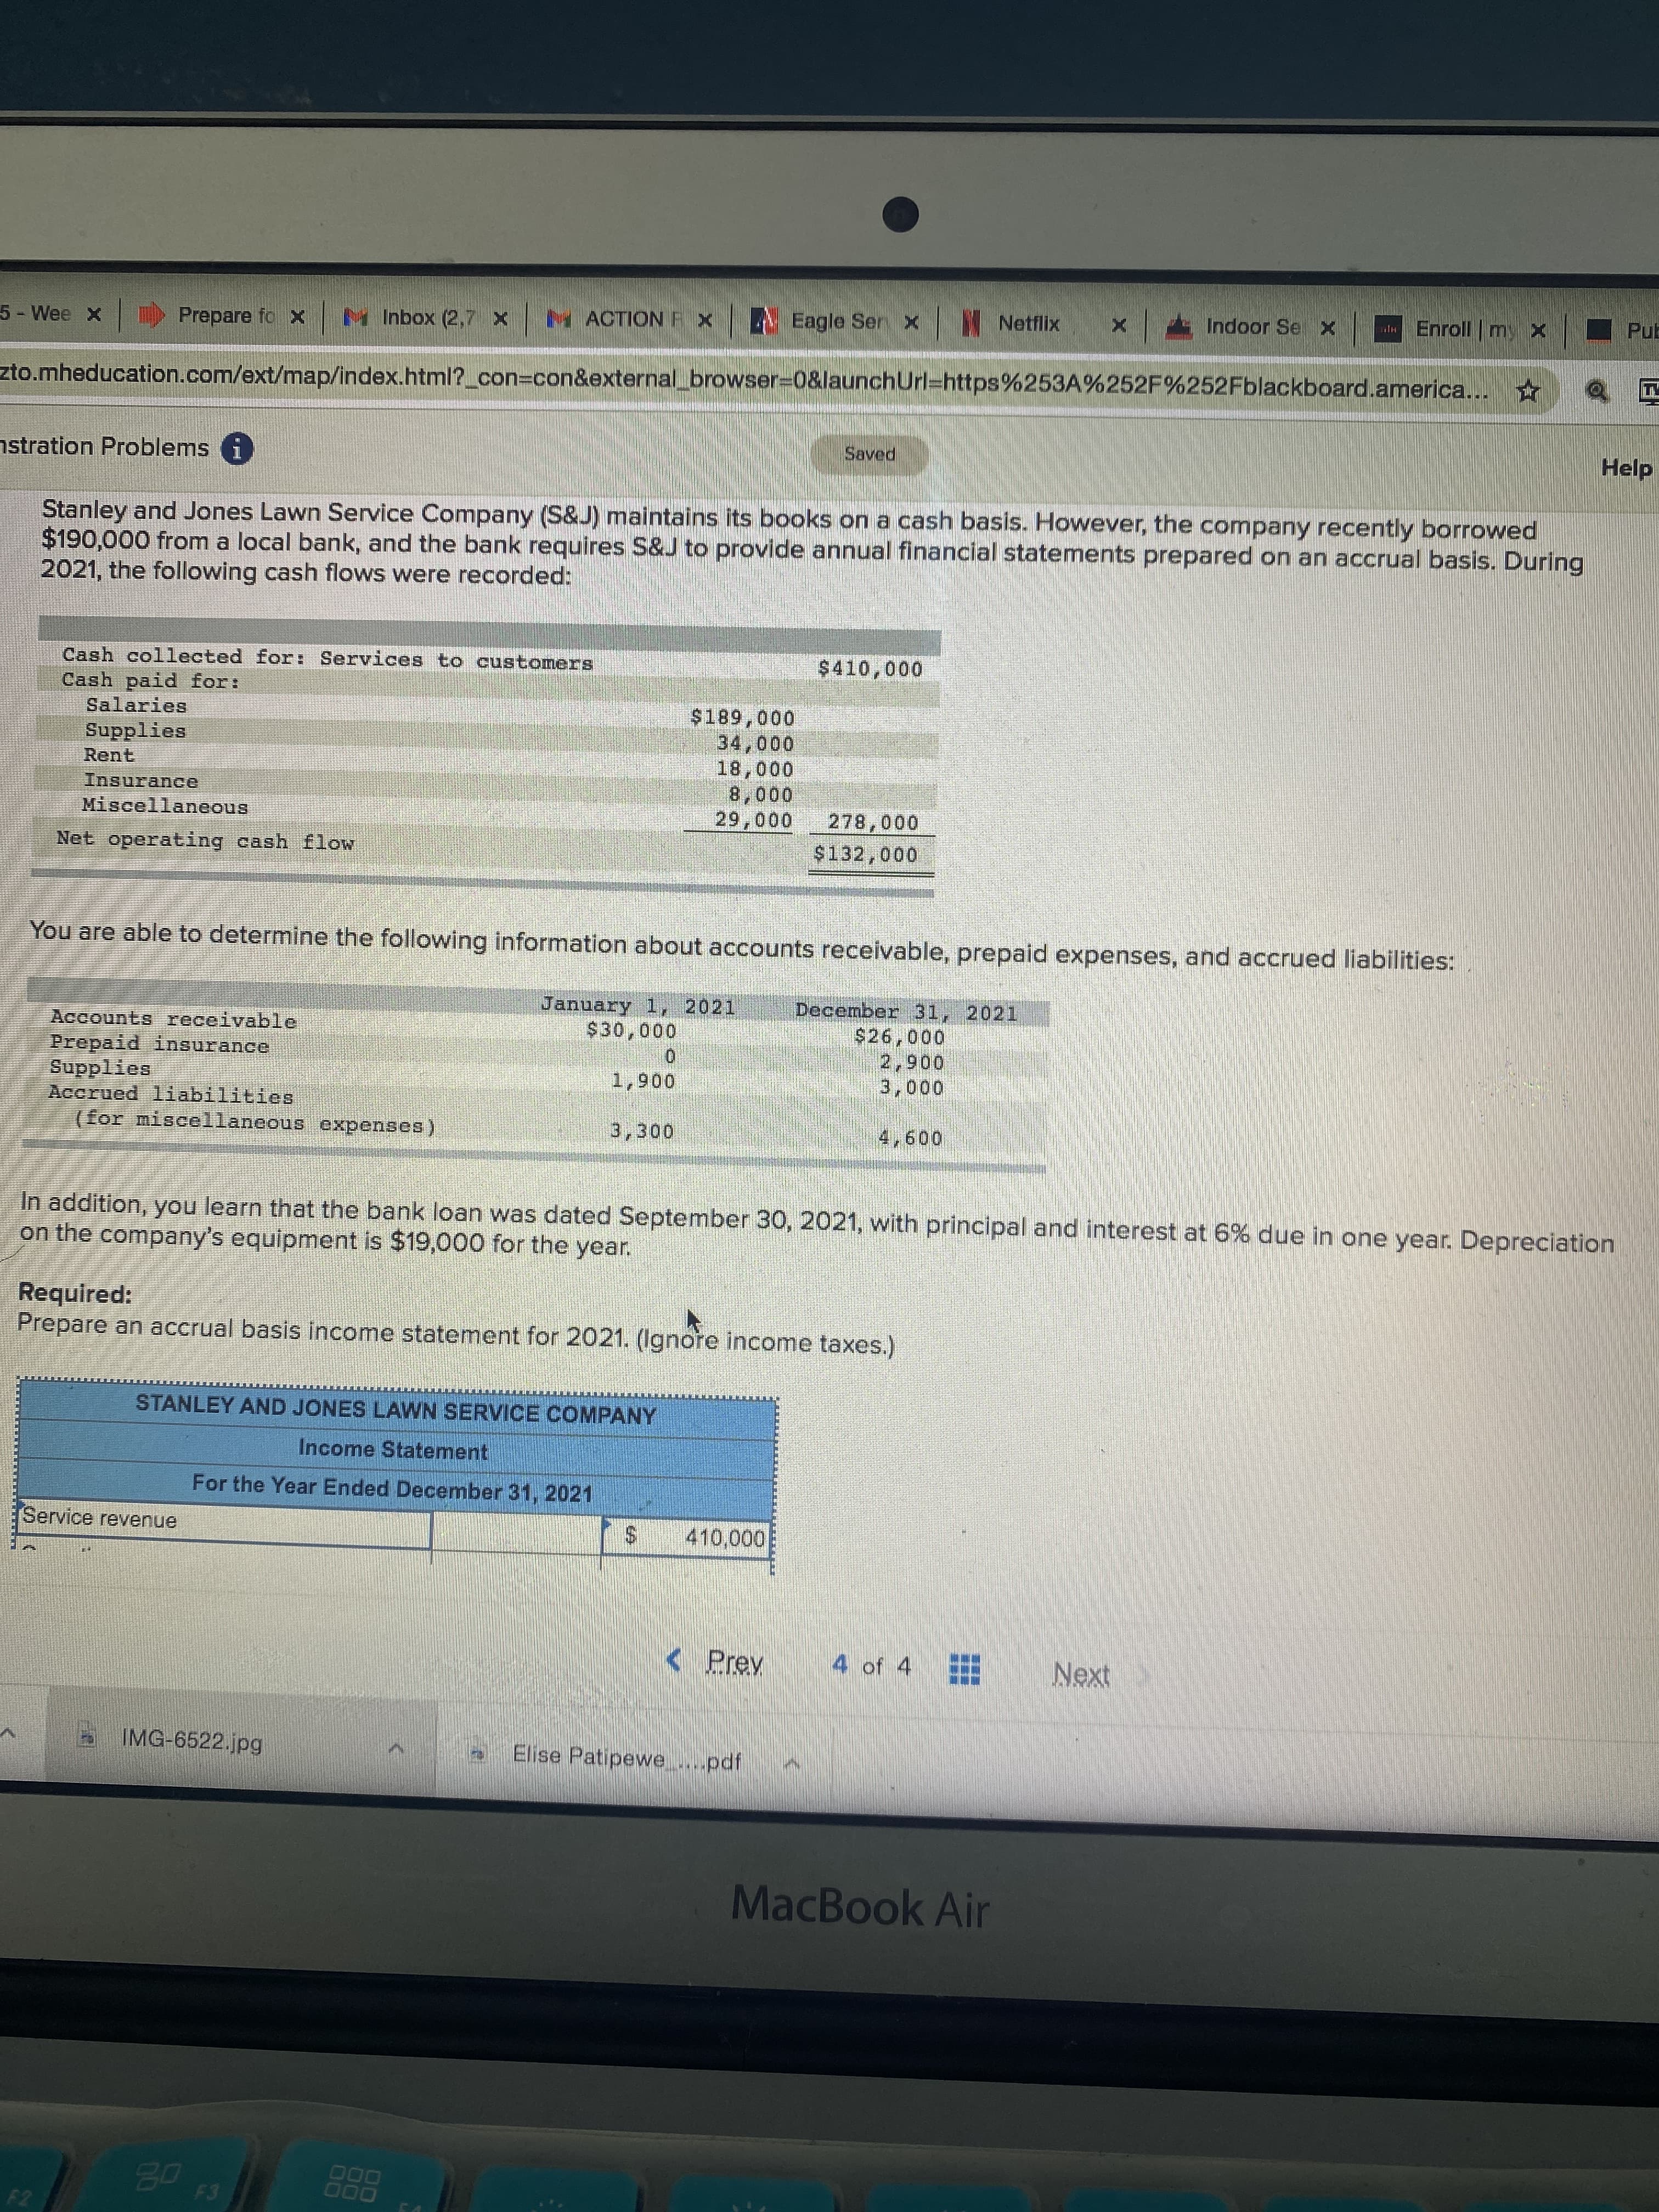 Required:
Prepare an accrual basis income statement for 2021. (Ignore income taxes.)
STANLEY AND JONES LAWN SERVICE COMPANY
Income Statement
For the Year Ended December 31, 2021
Service revenue
410,000
%24
